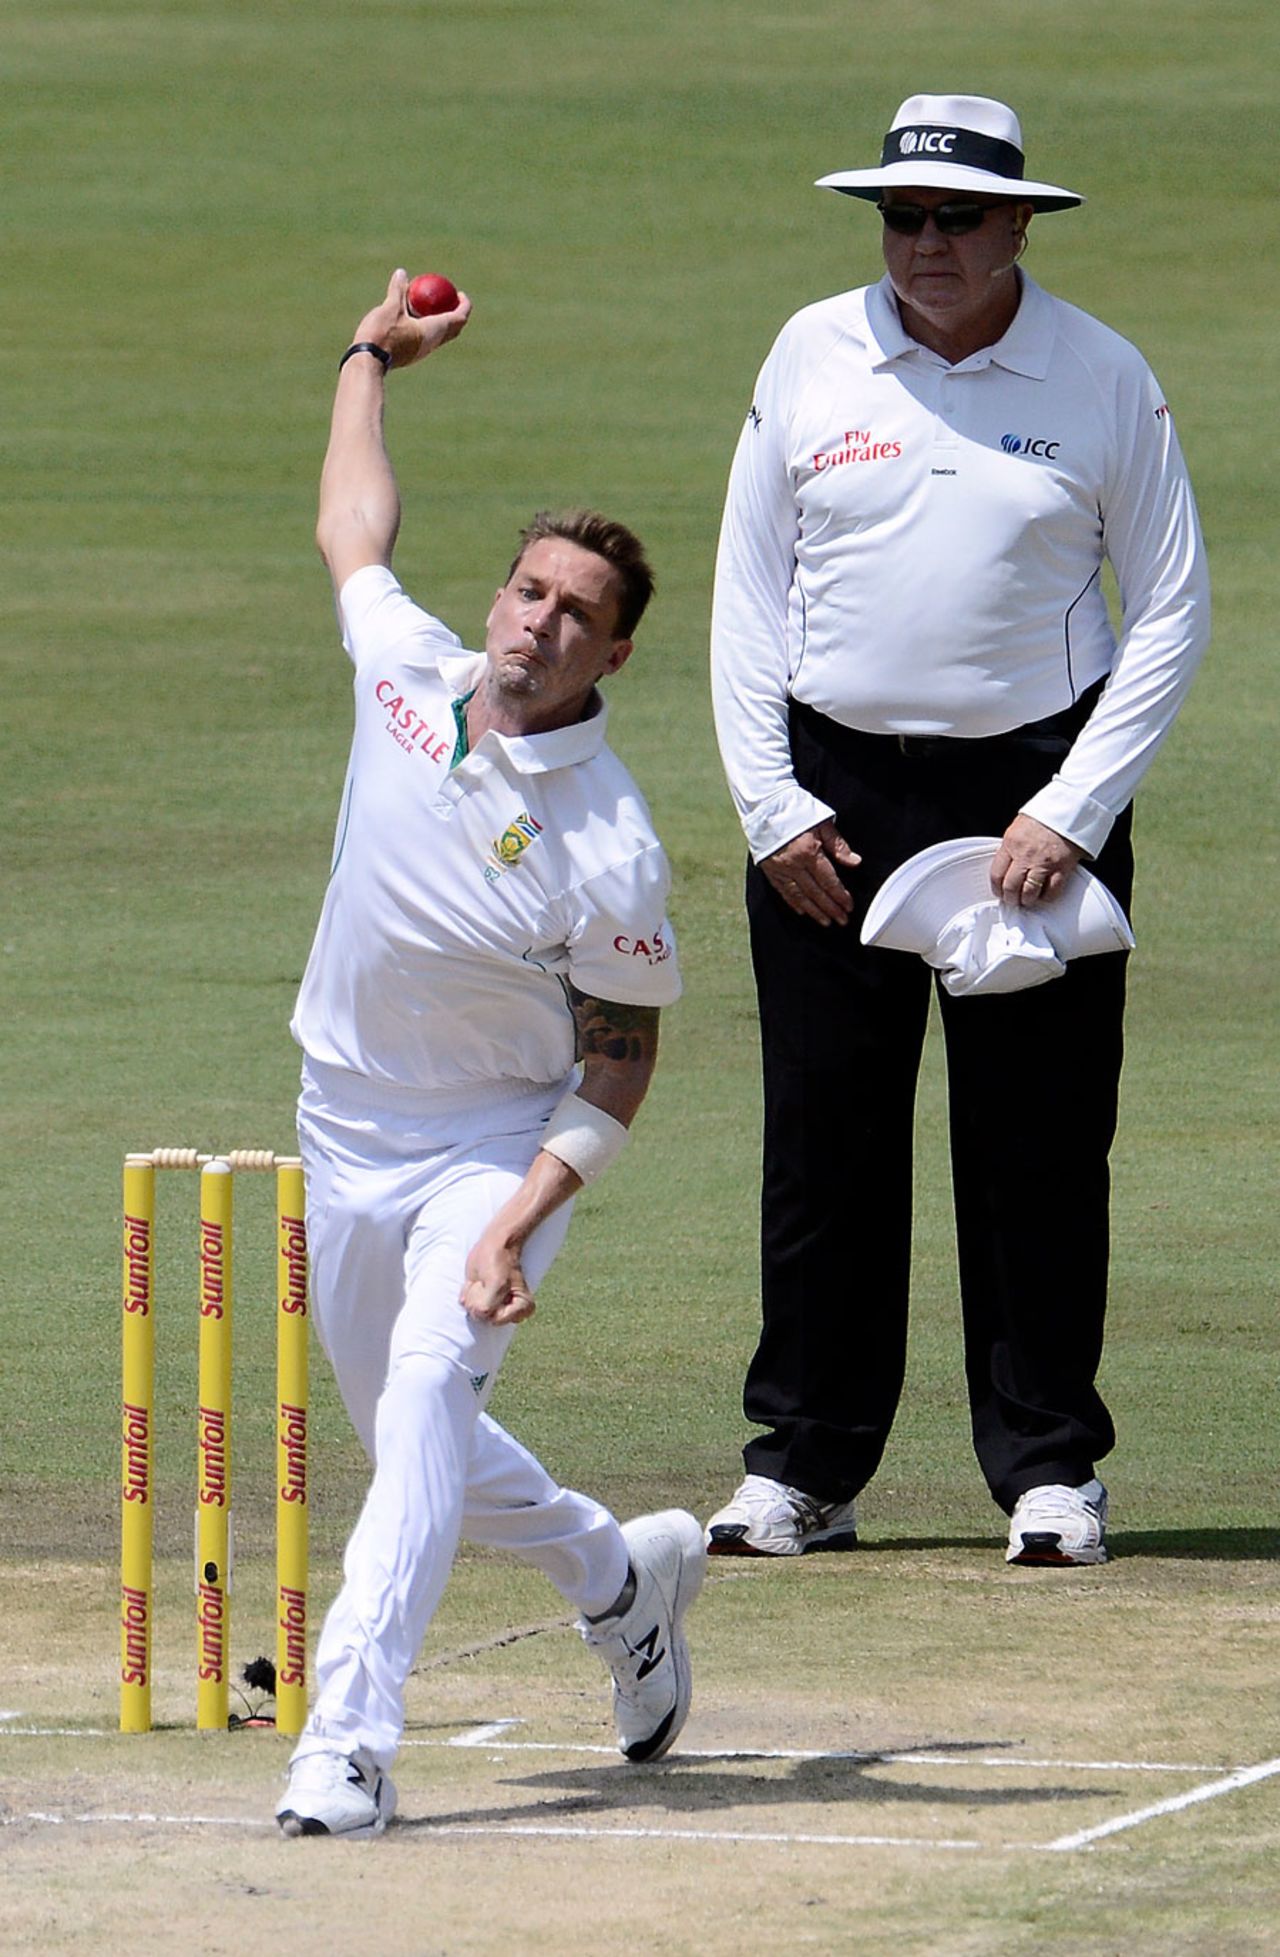 Dale Steyn about to deliver the ball, South Africa v Pakistan, 3rd Test, Centurion, 3rd day, February 24, 2013